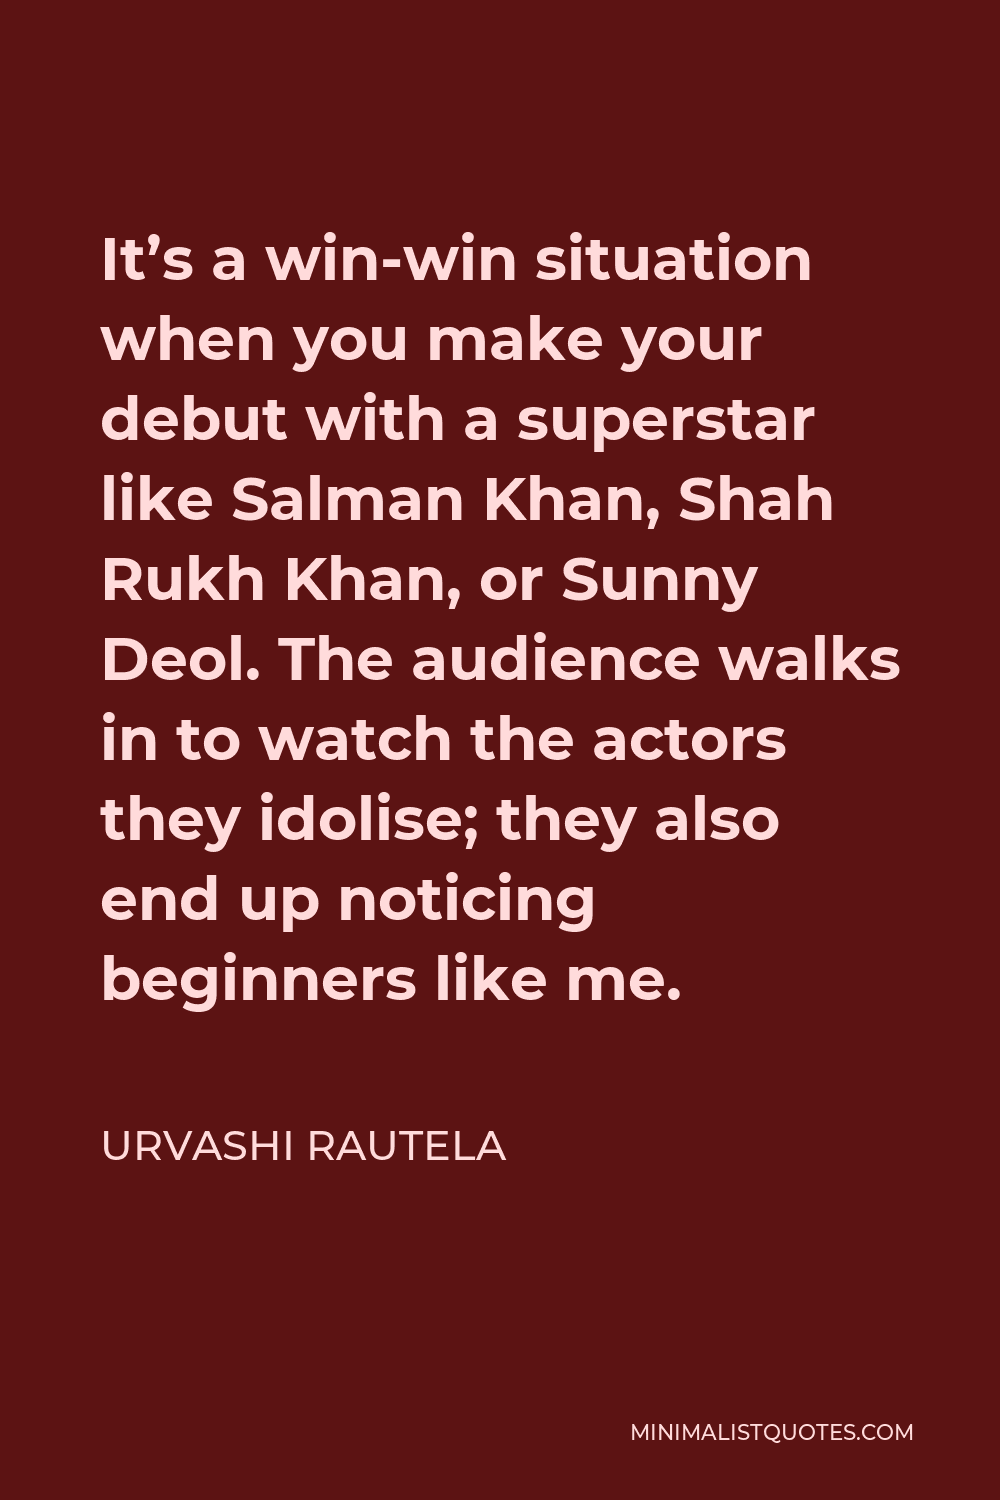 Urvashi Rautela Quote - It’s a win-win situation when you make your debut with a superstar like Salman Khan, Shah Rukh Khan, or Sunny Deol. The audience walks in to watch the actors they idolise; they also end up noticing beginners like me.